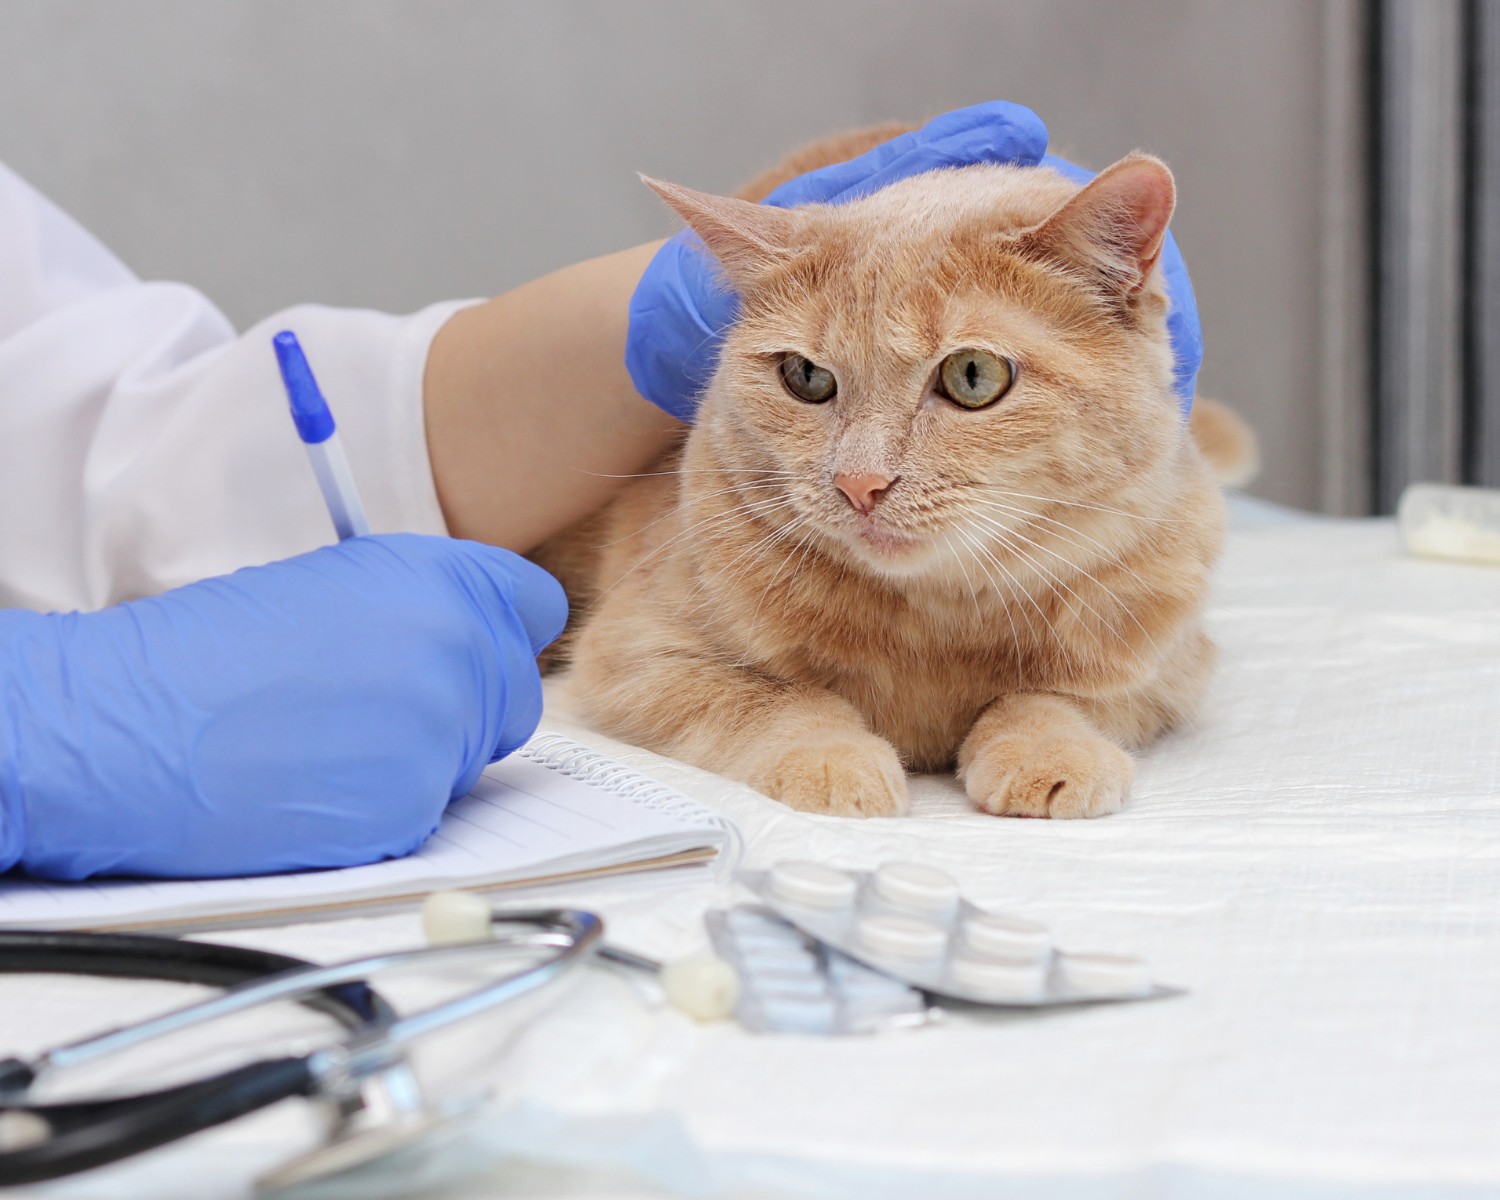 Animal health plan: What is it, how does it work and how much does it cost?